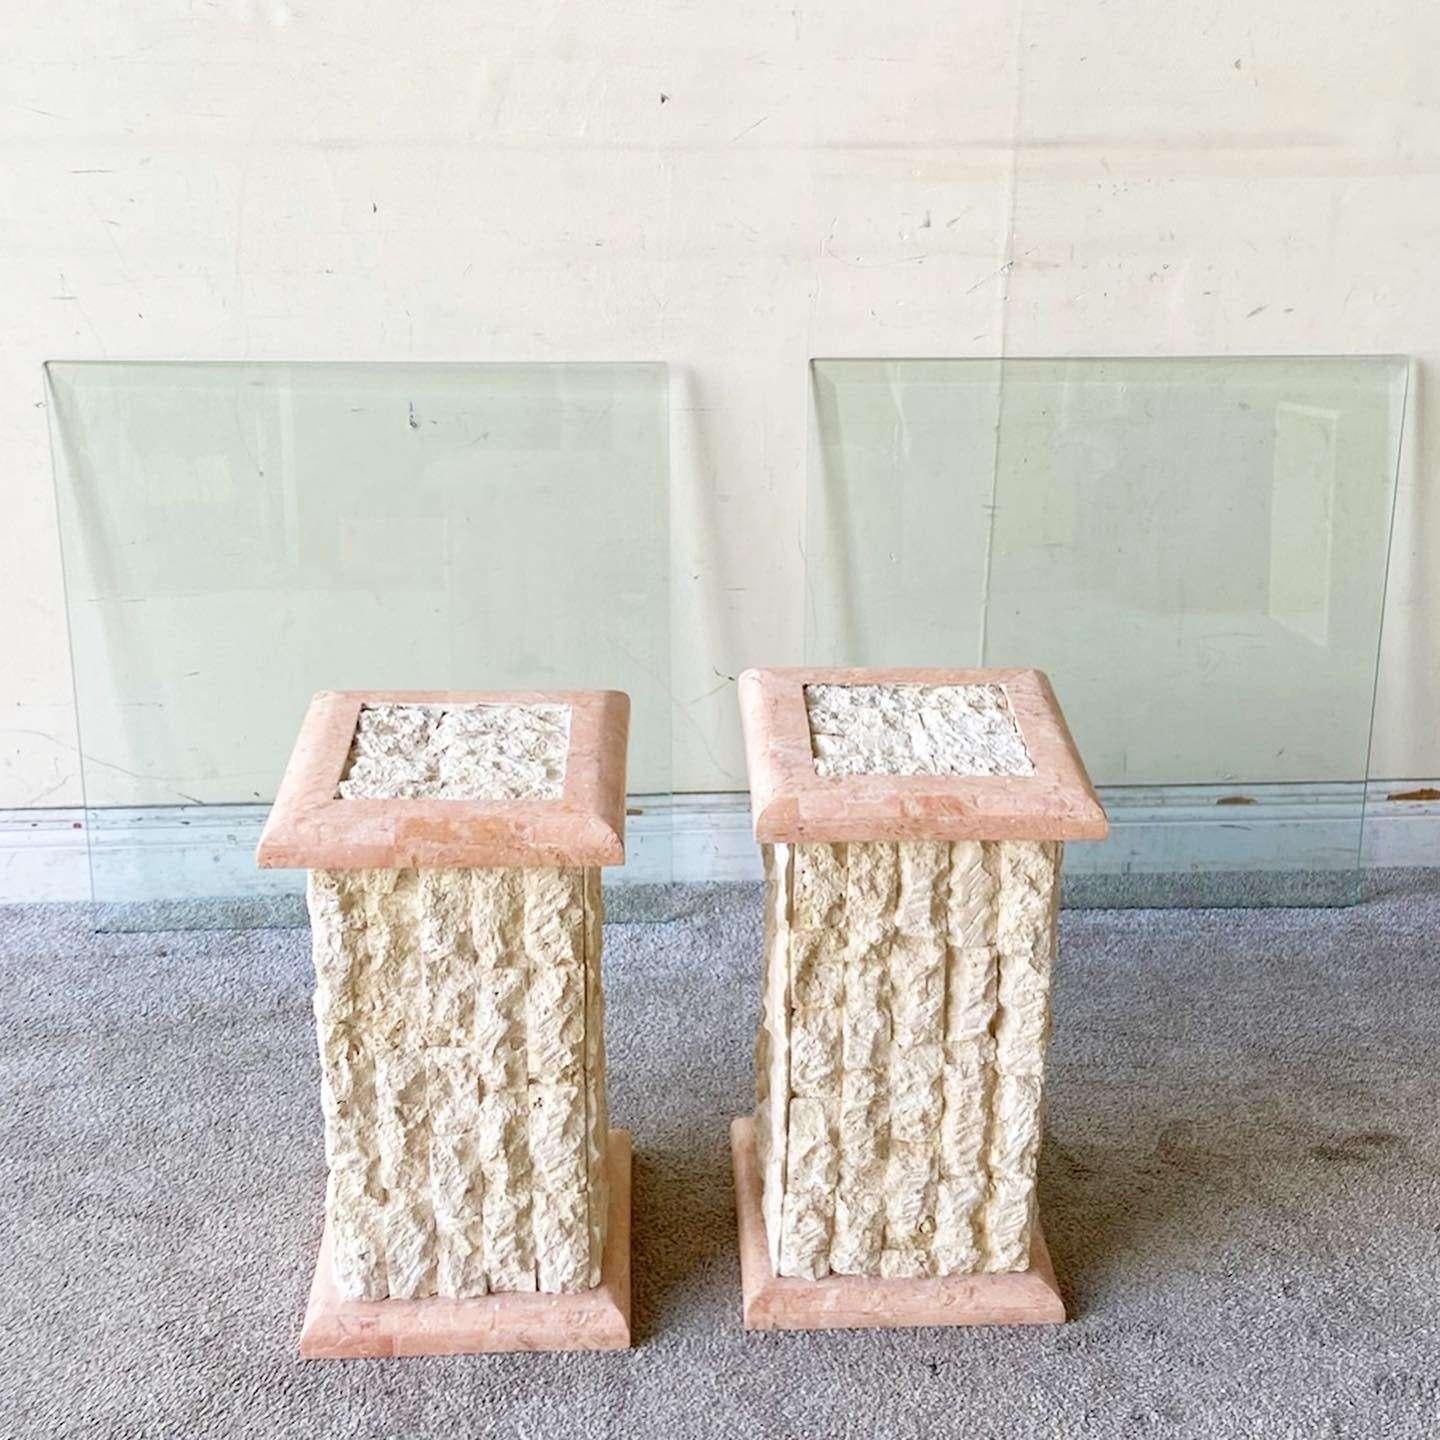 1990s Postmodern Tessellated Stone Glass Top Side Tables - a Pair In Good Condition For Sale In Delray Beach, FL